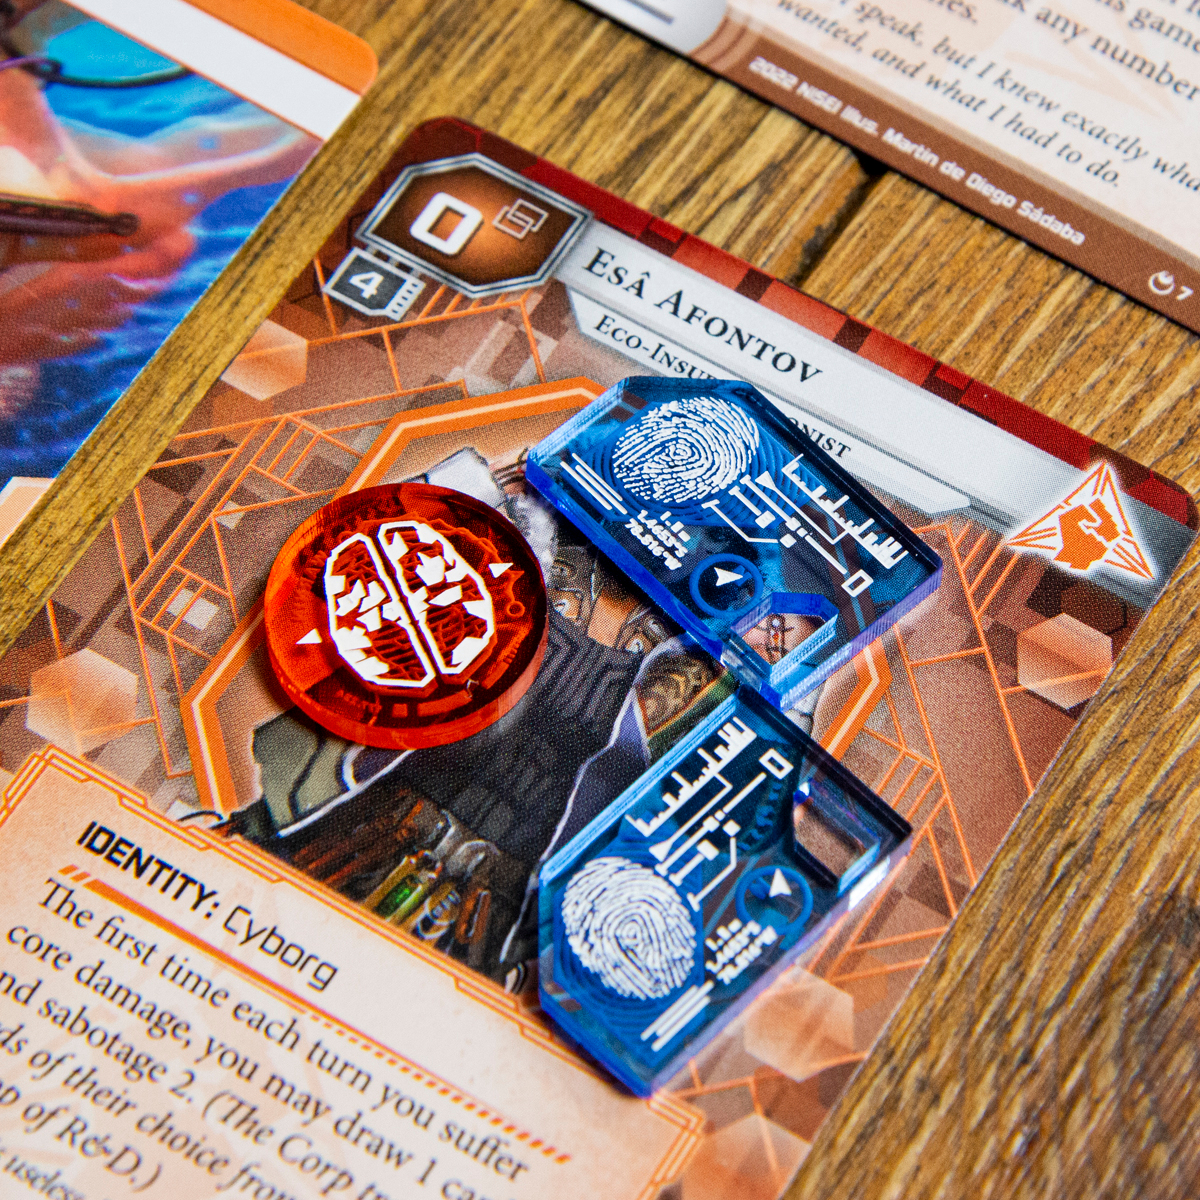 A Brain Damage Token and two Tag Tokens from the Data Token set on top of the Null Signal Games Netrunner card, Esâ Afontov